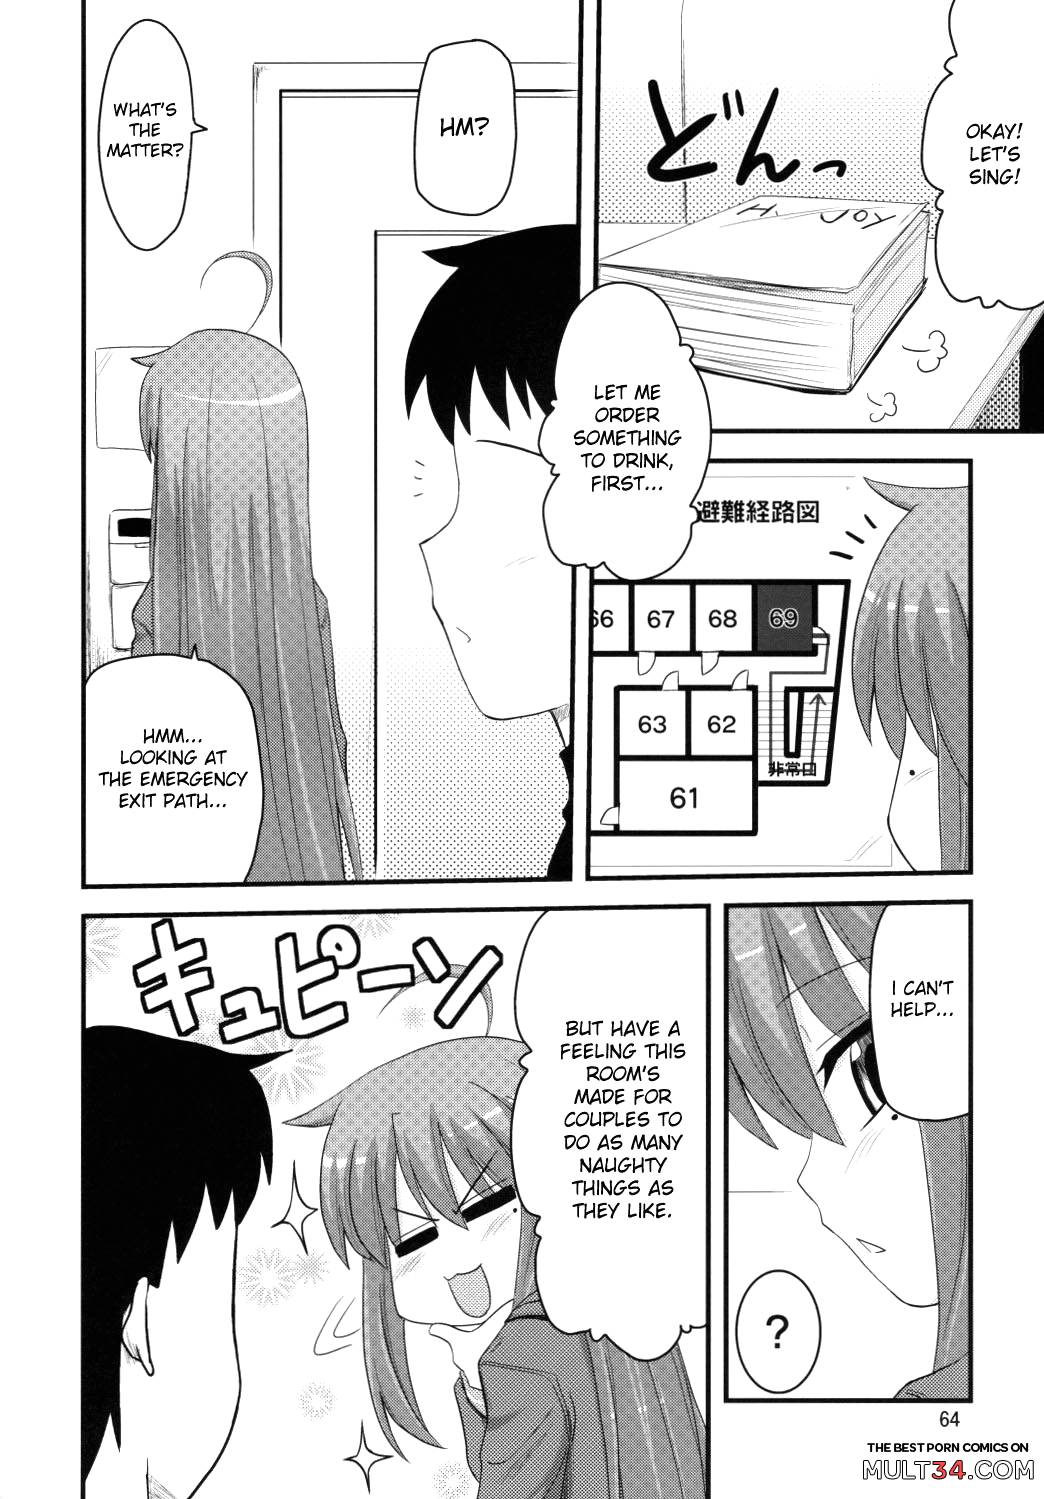 Konata and Oh-zu 4 people each and every one + 1 page 60